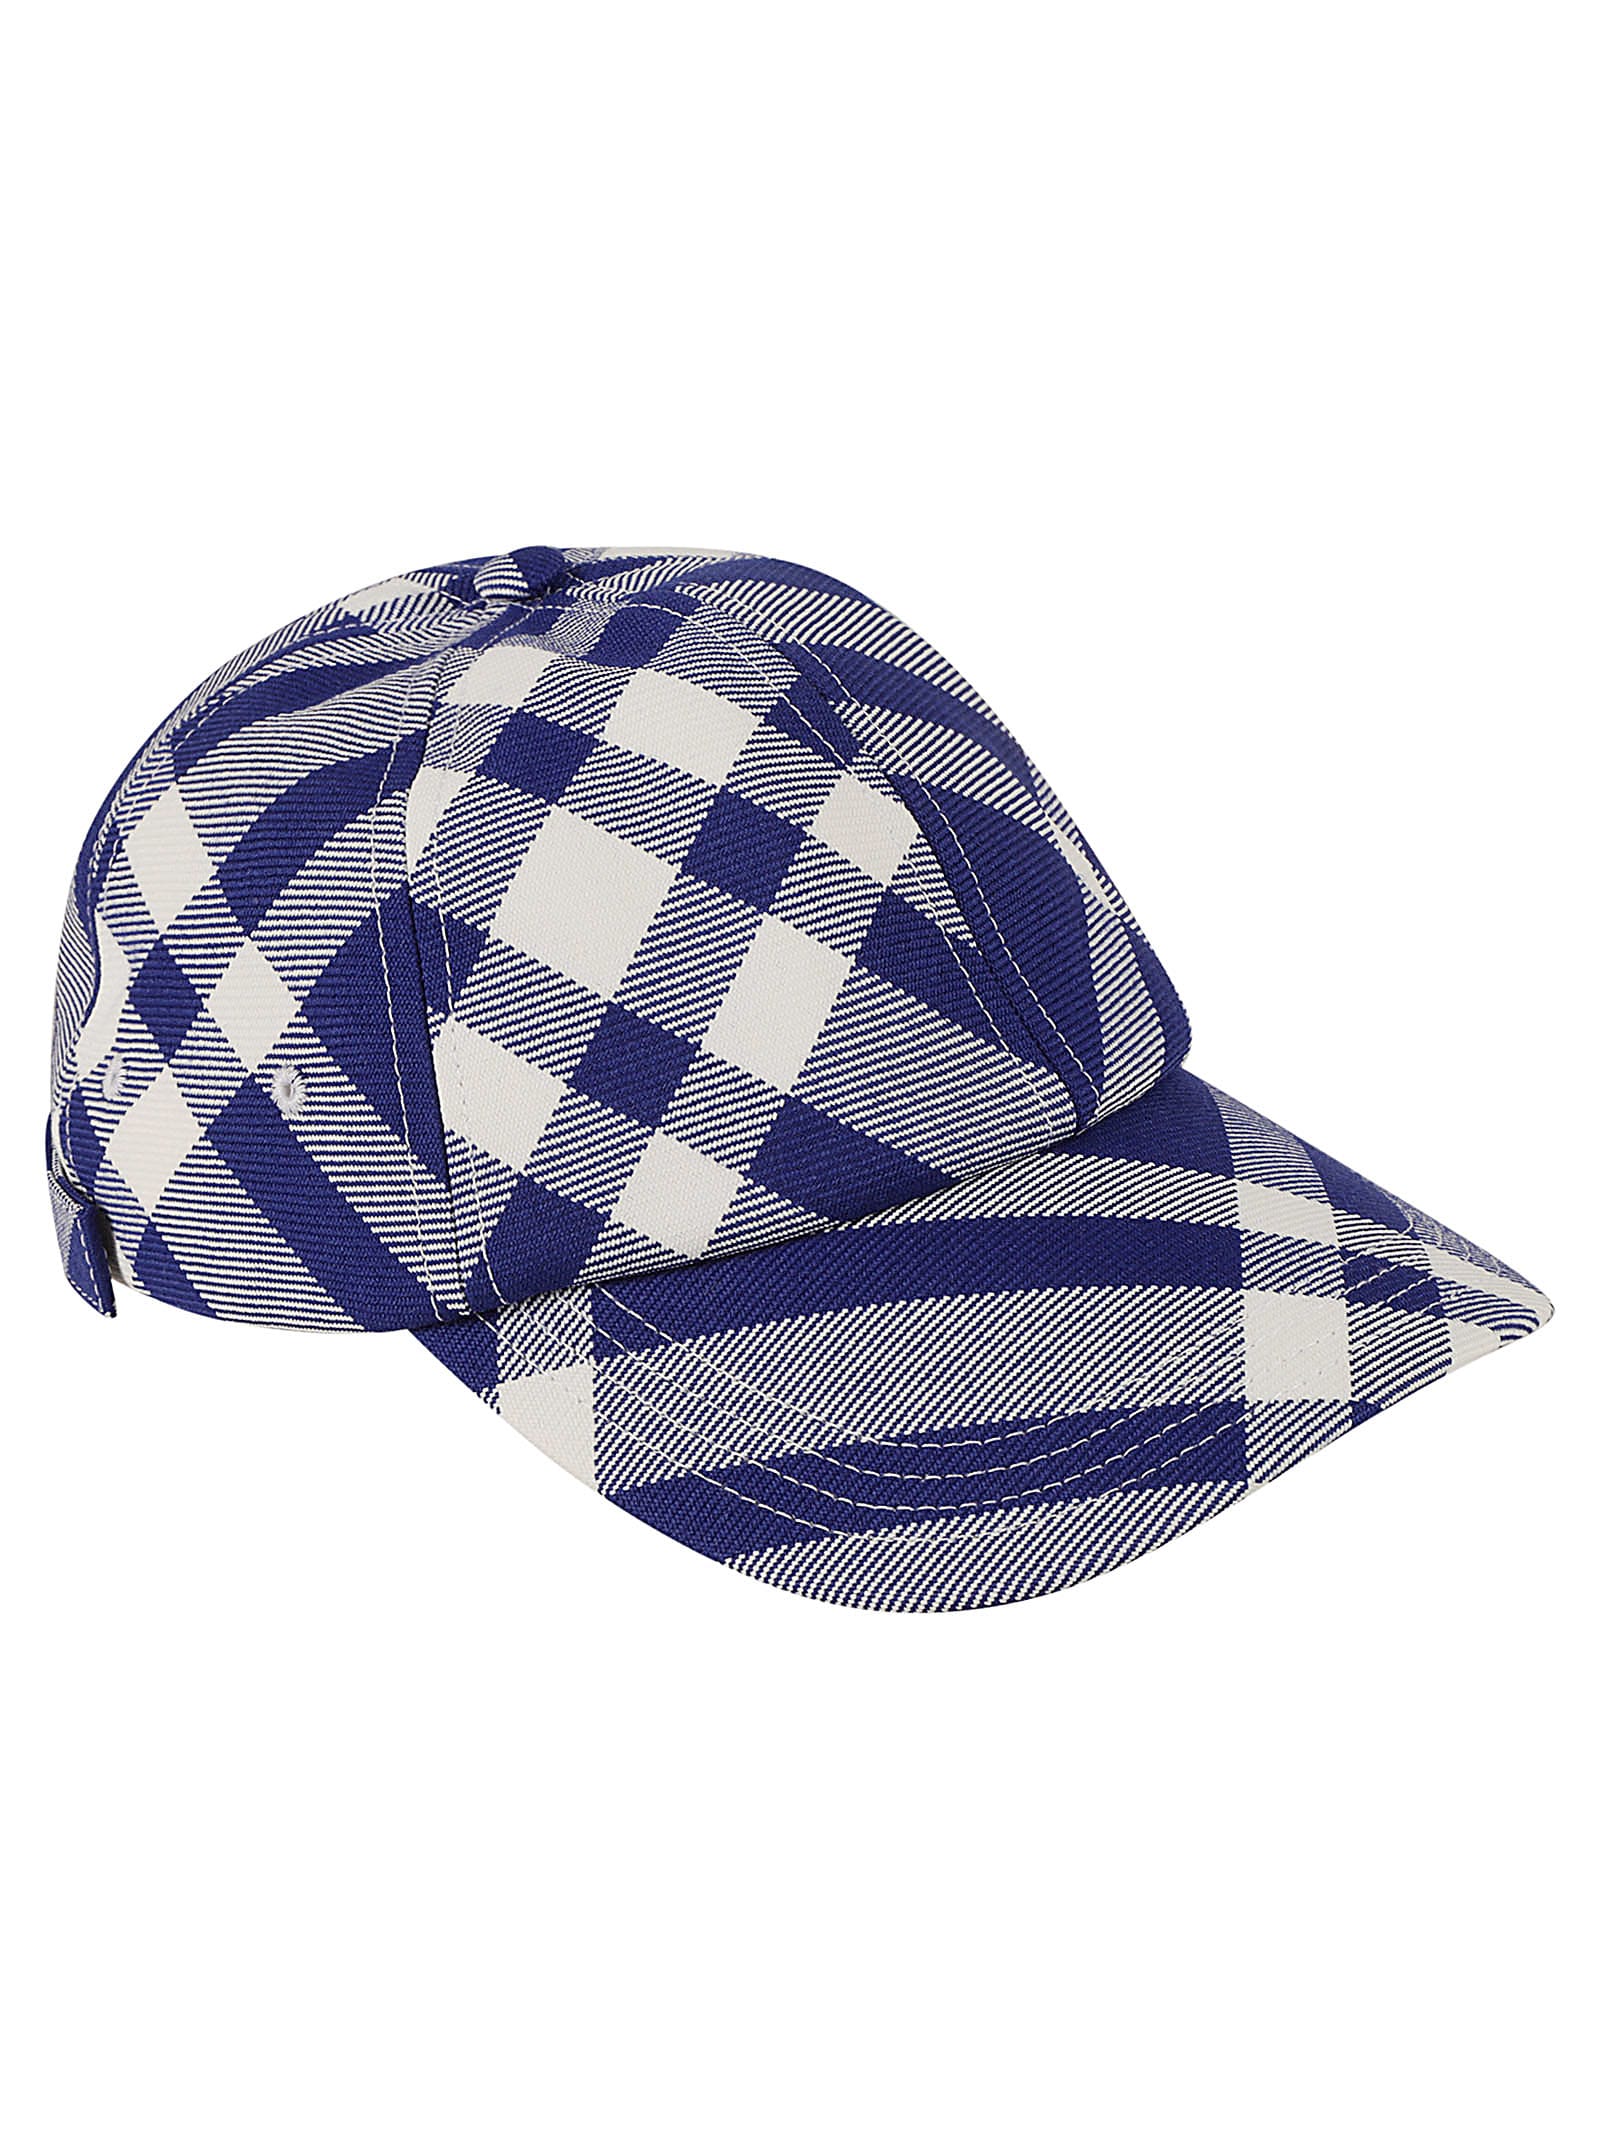 Burberry Knight Cap In Knight Ip Check